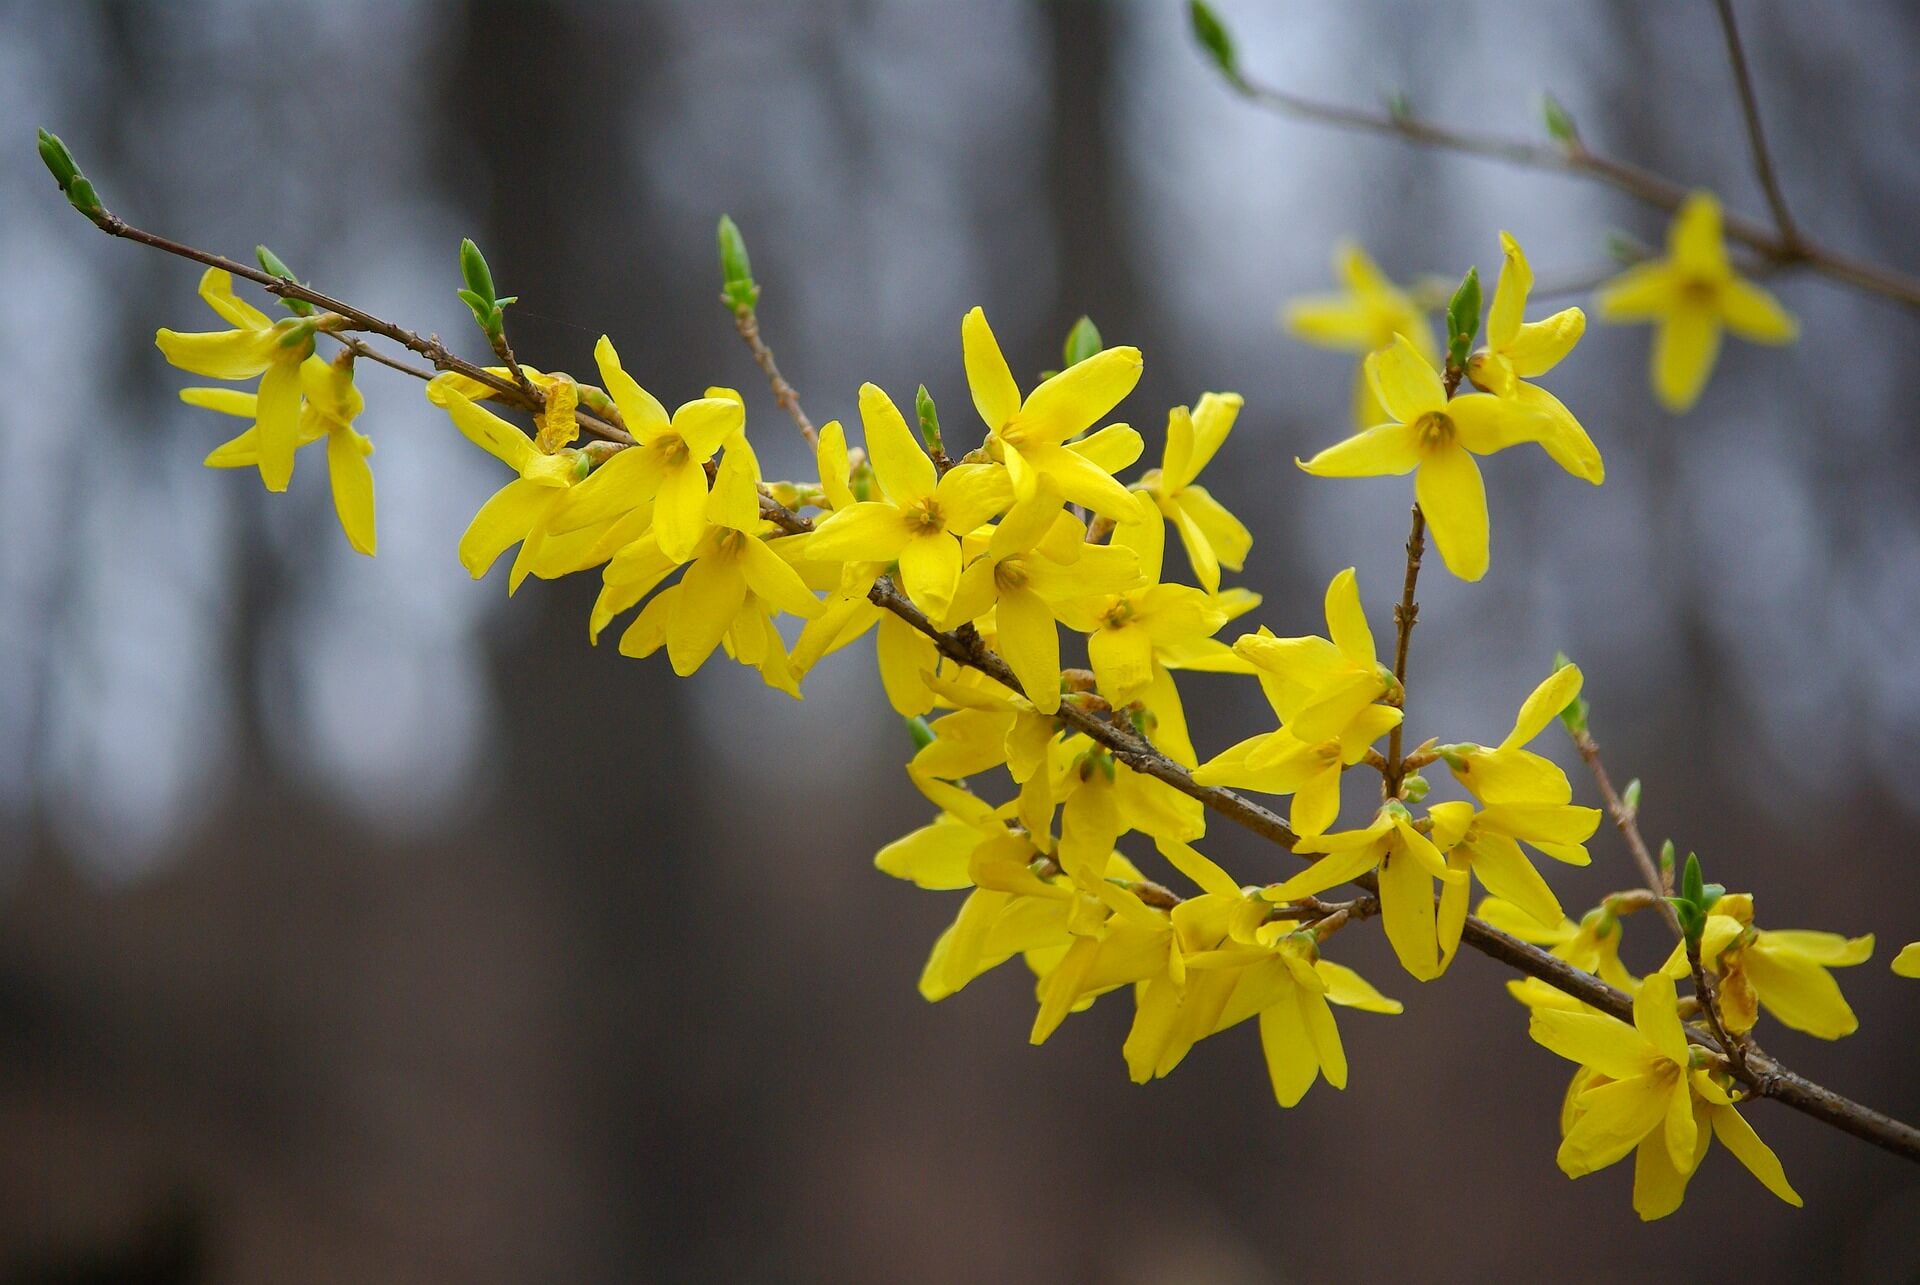 Photo: A forsythia branch in full bloom.